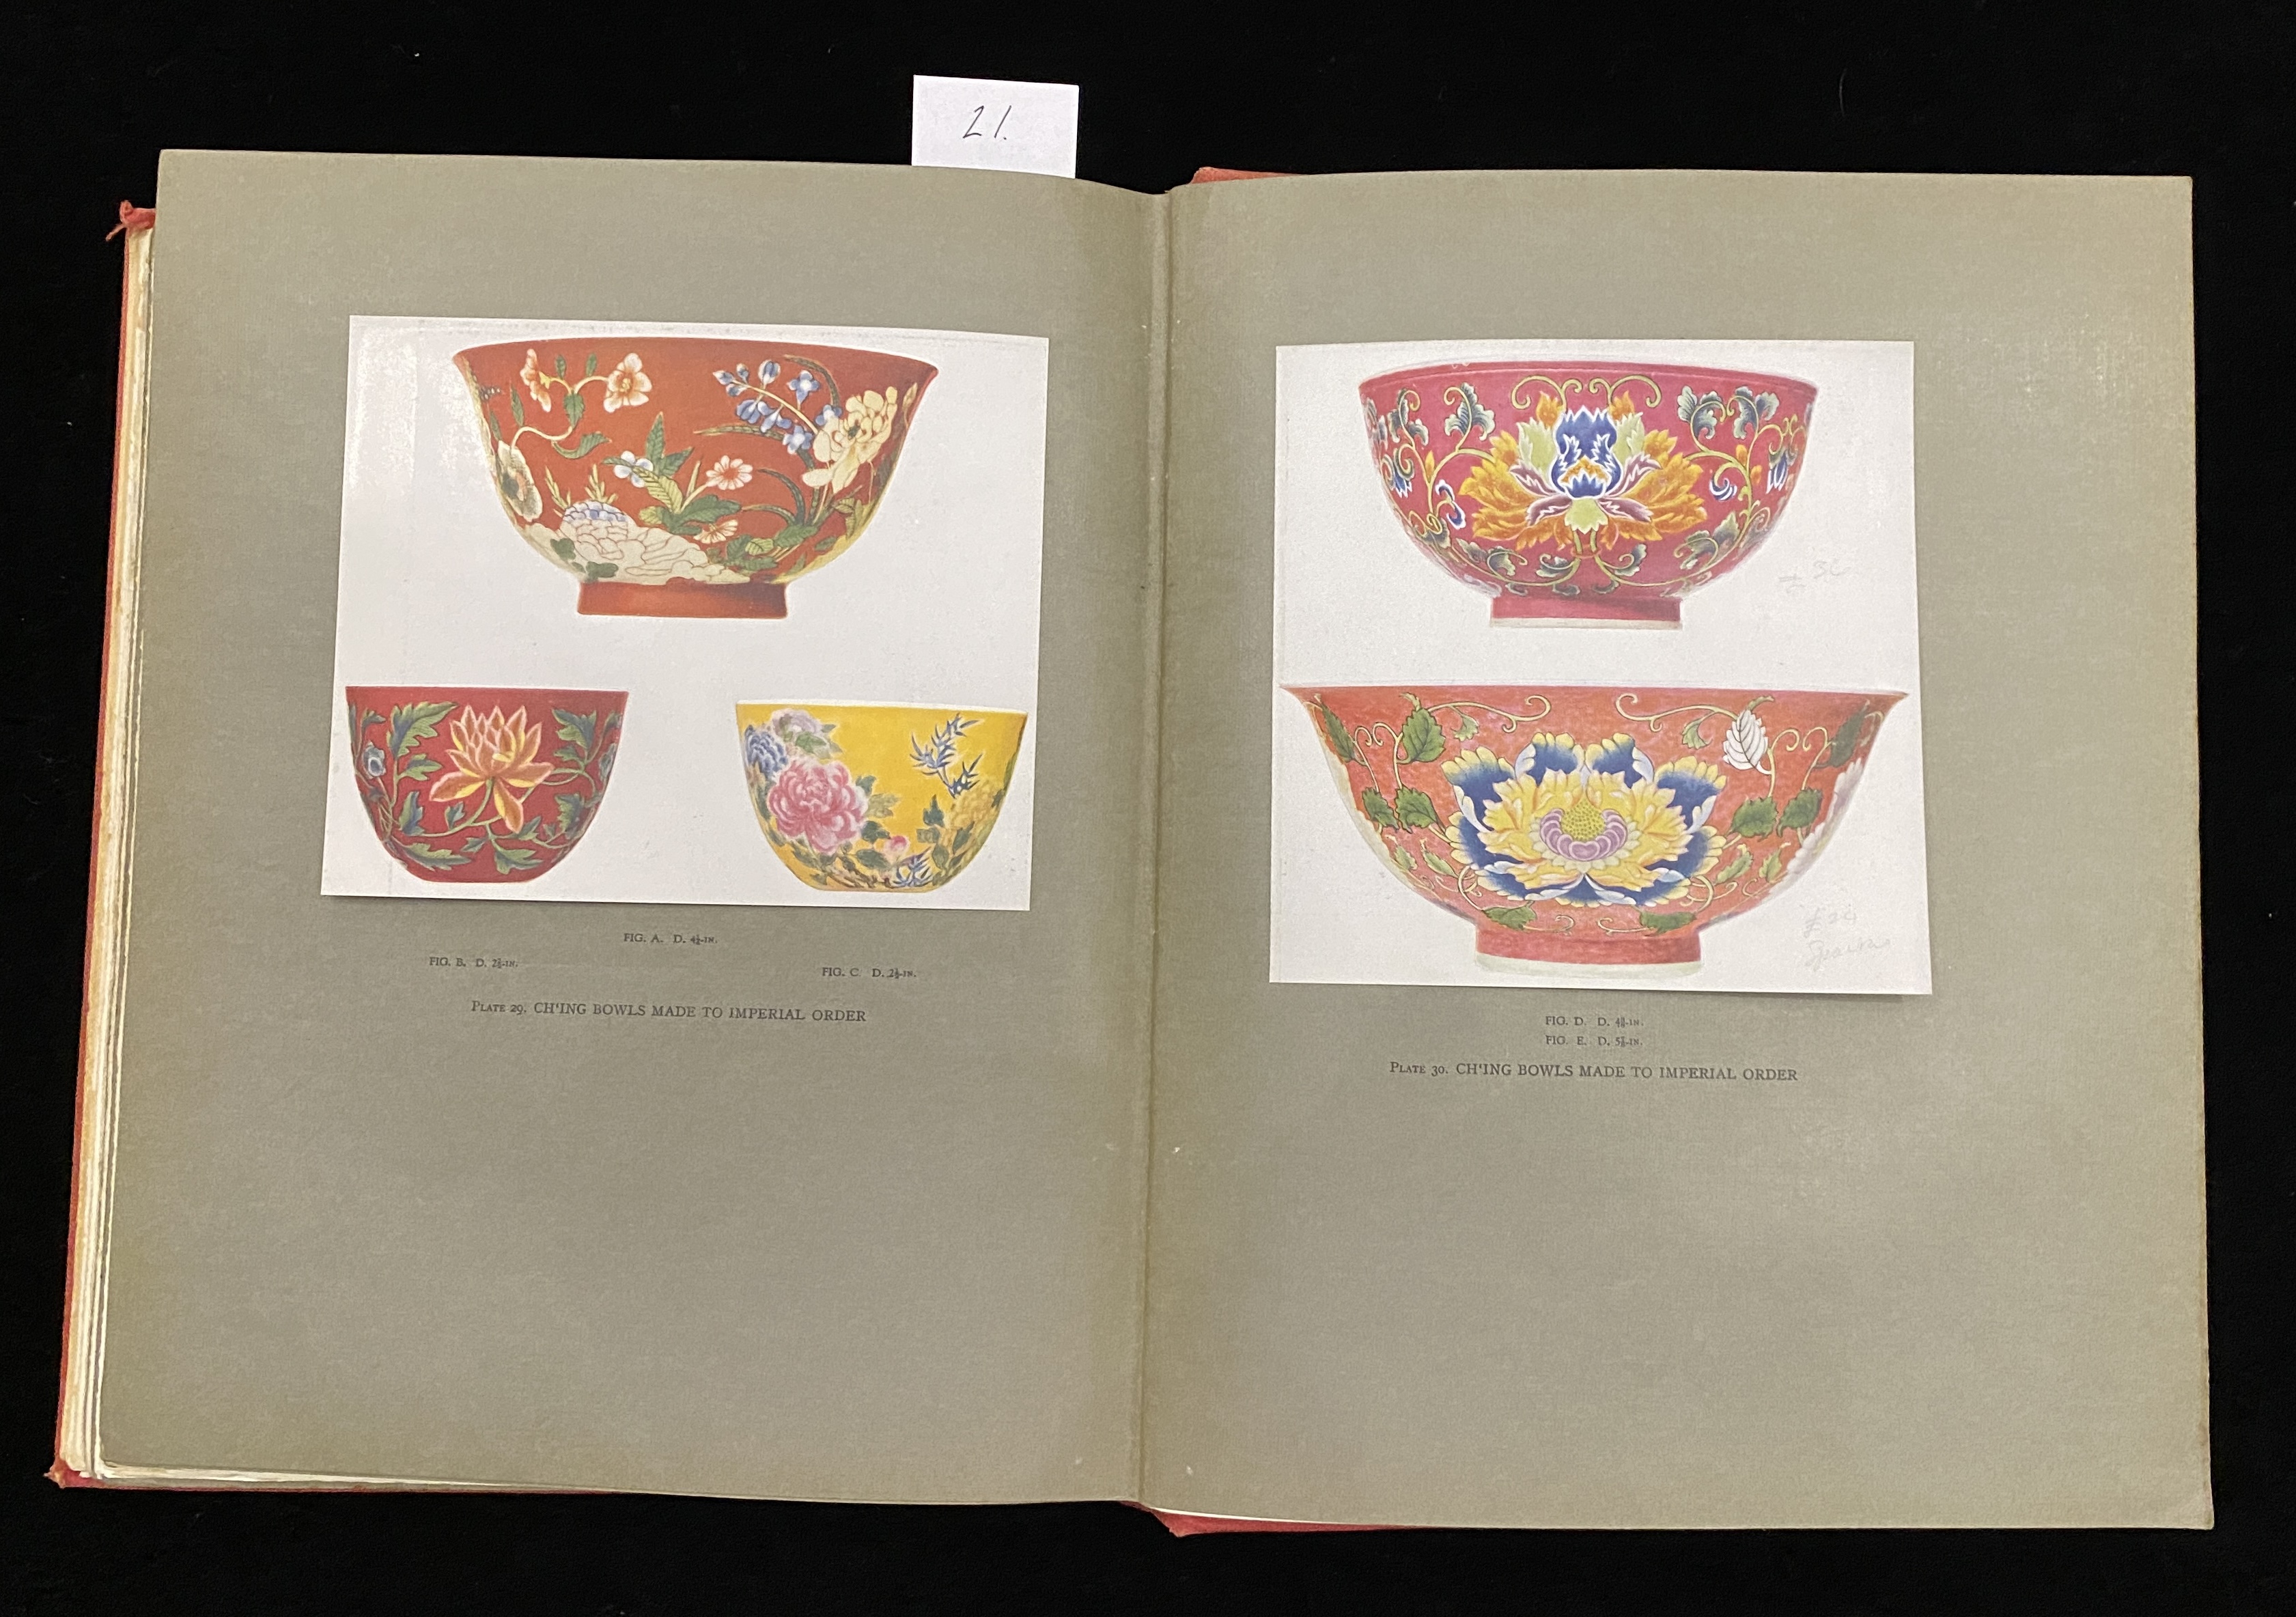 CHINESE CERAMICS IN PRIVATE COLLECTIONS R. L. HOBSON B. RACKHAM W. KING HALT0N & TRUSCOTT SMITH 1931 - Image 9 of 10